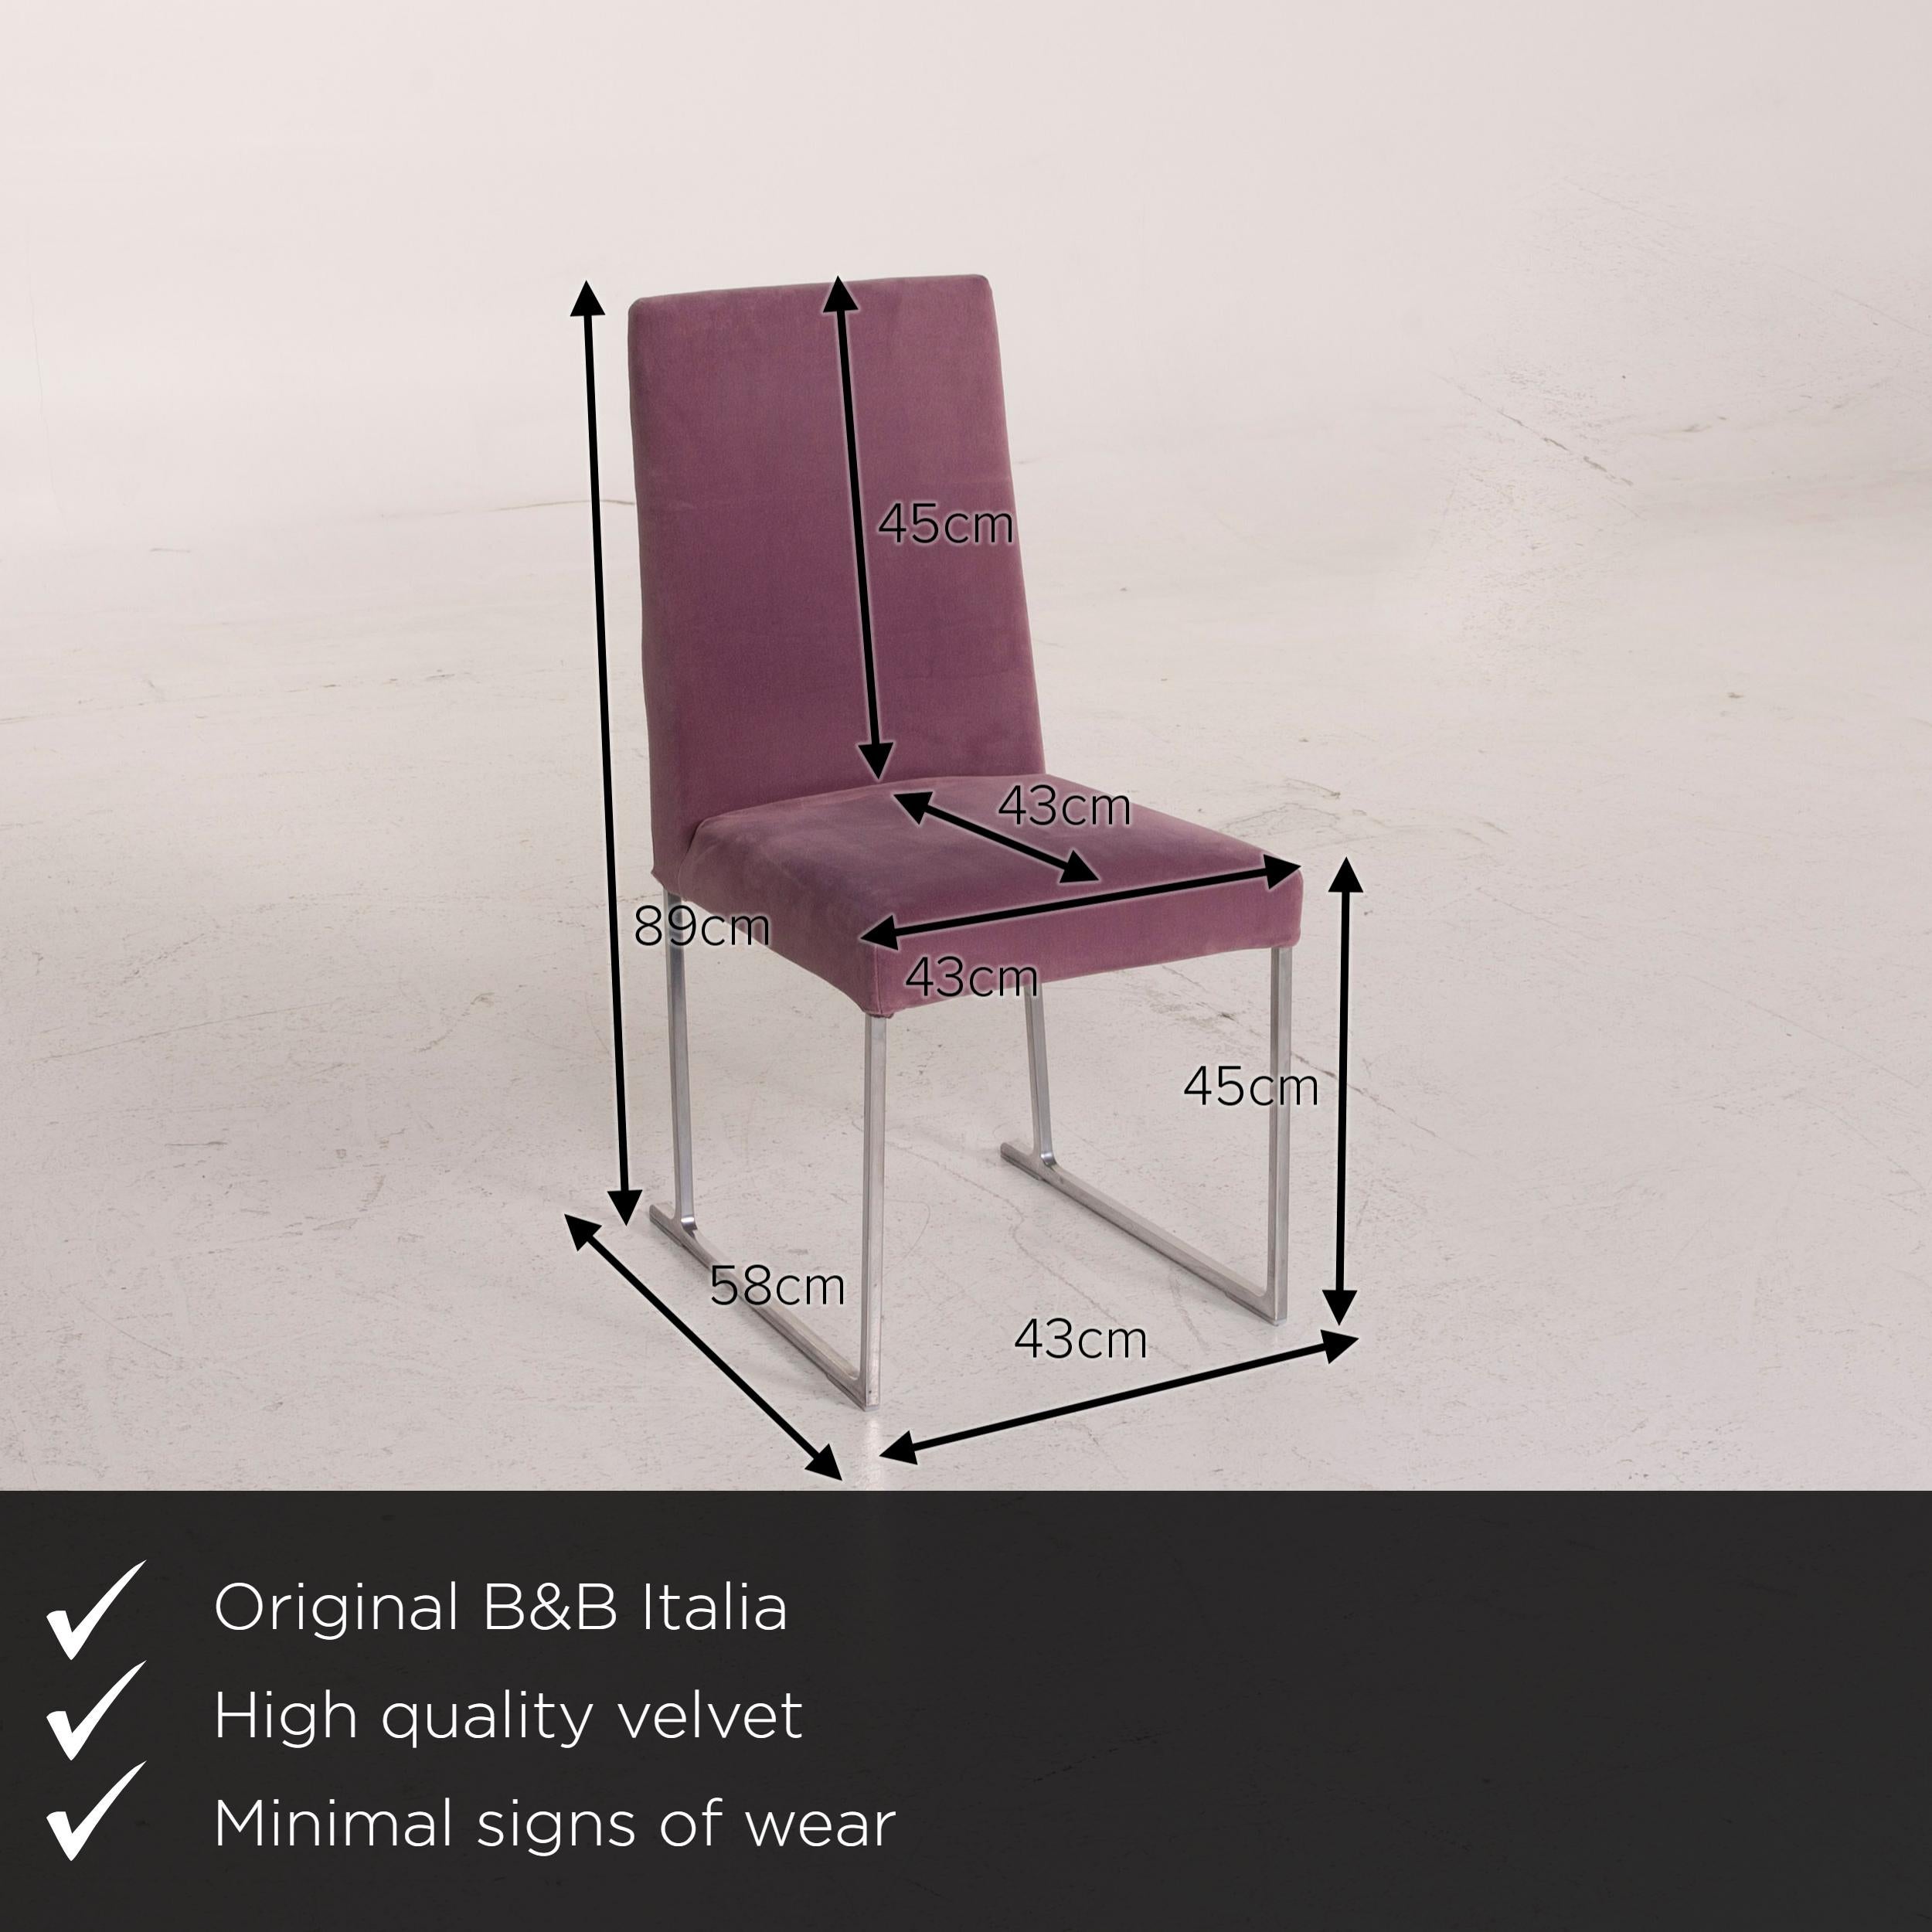 We present to you a B&B Italia solo (B&B) velvet chair lilac fabric.

 

 Product measurements in centimeters:
 

Depth 58
Width 43
Height 89
Seat height 45
Seat depth 43
Seat width 43
Back height 45.

   